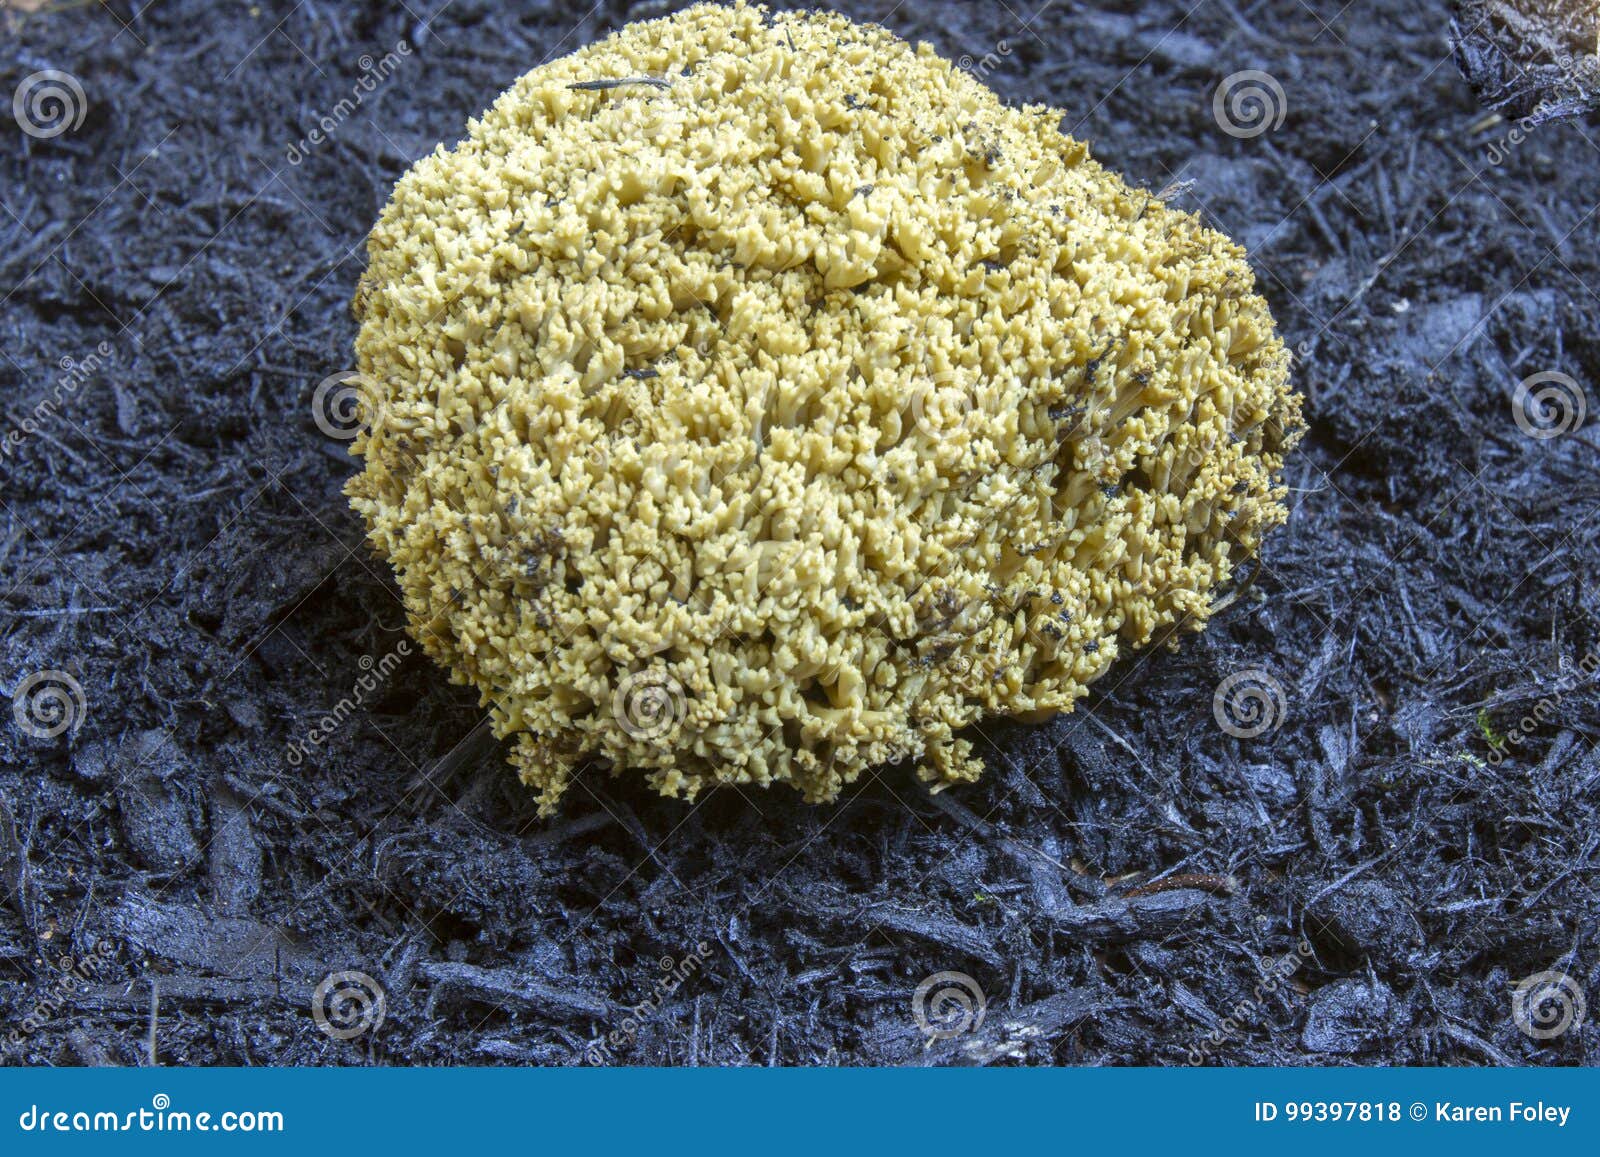 Texture Of Natural Fungus On Mulch Stock Photo Image Of Organic Vegetable 99397818